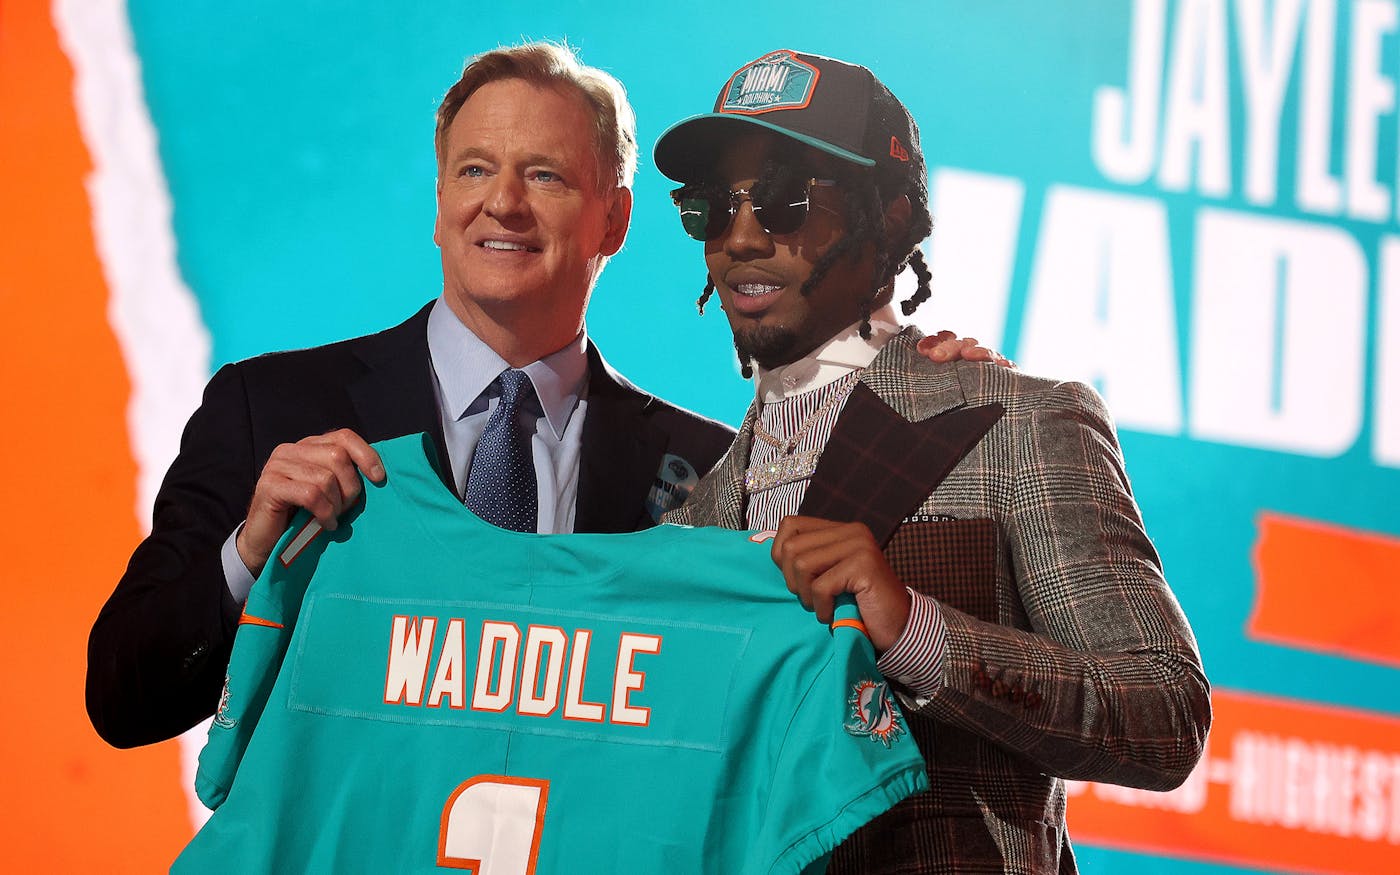 LOOK: Jaylen Waddle's Miami Dolphins jersey already in Pro